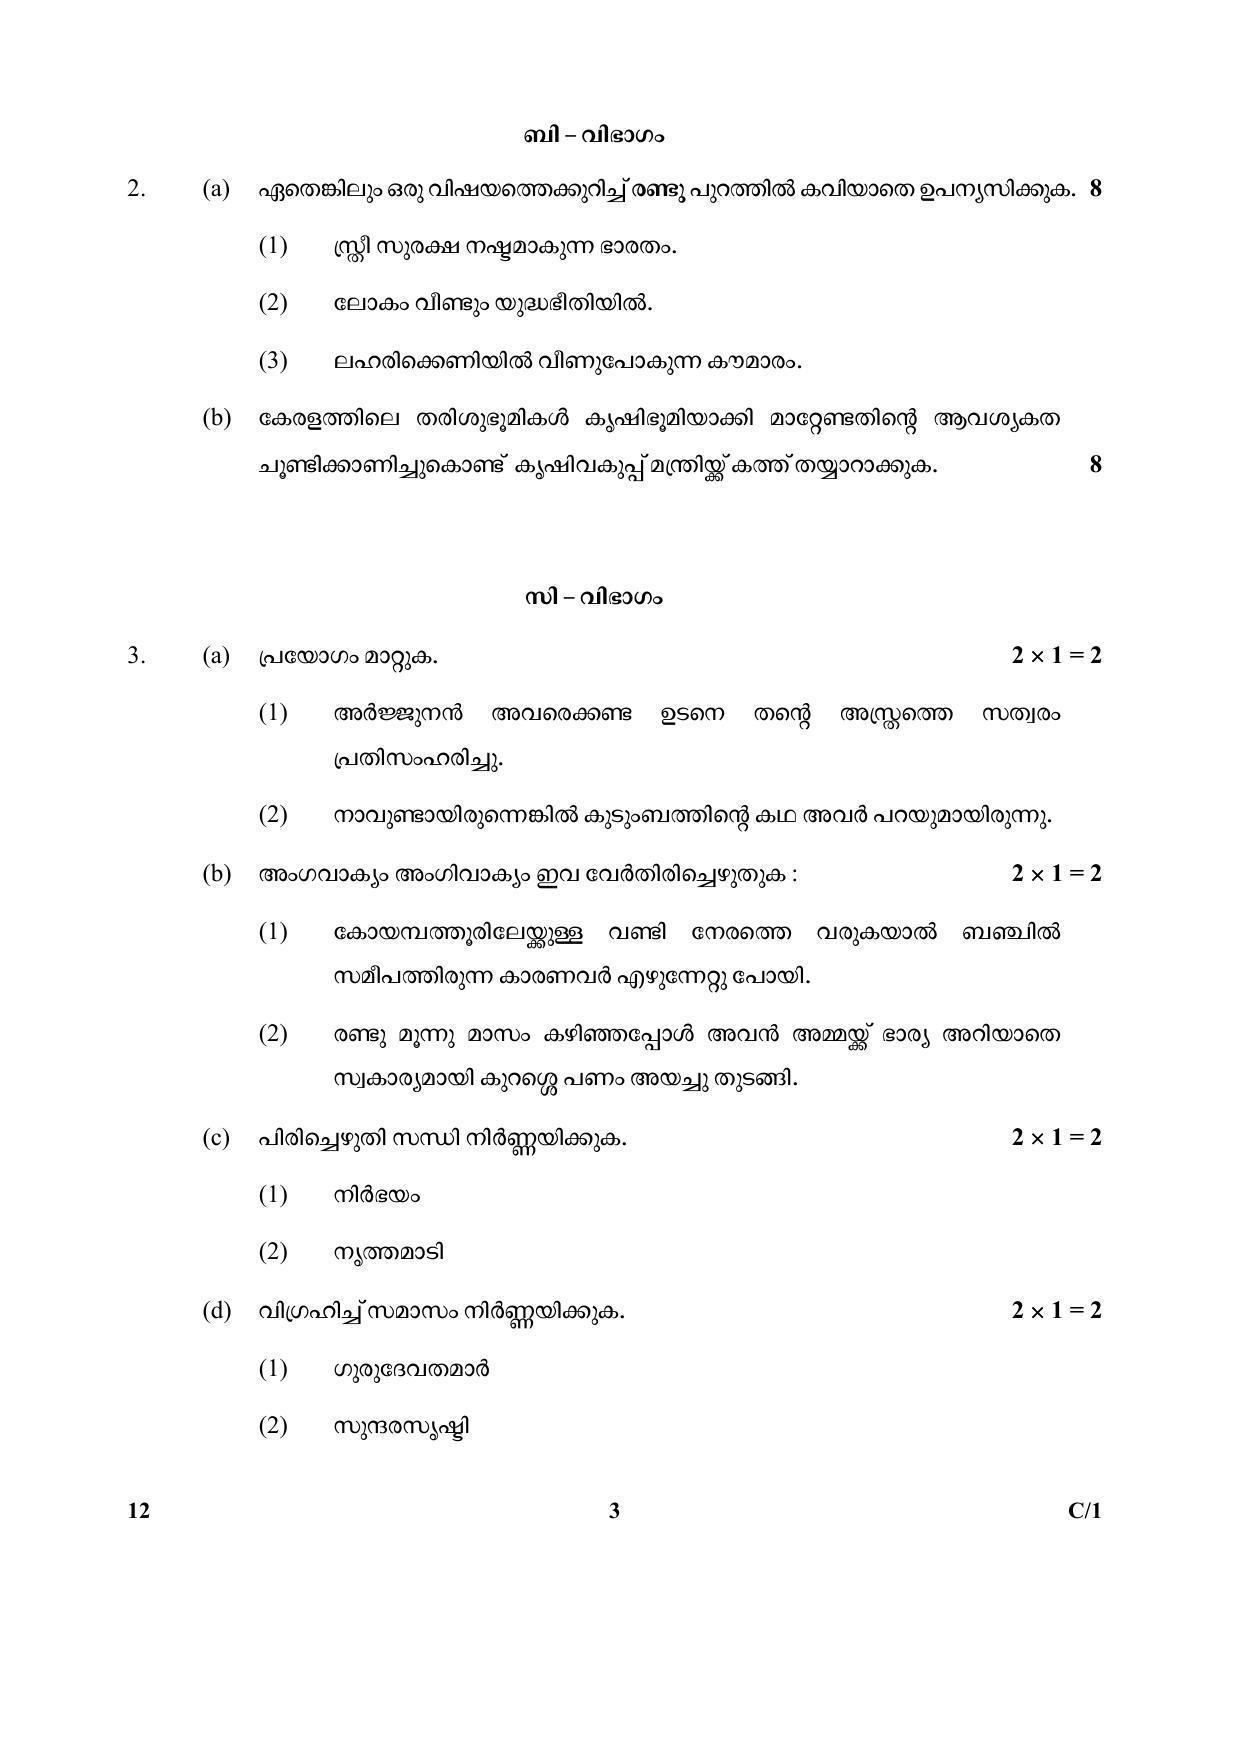 CBSE Class 10 12 (Malayalam) 2018 Compartment Question Paper - Page 3